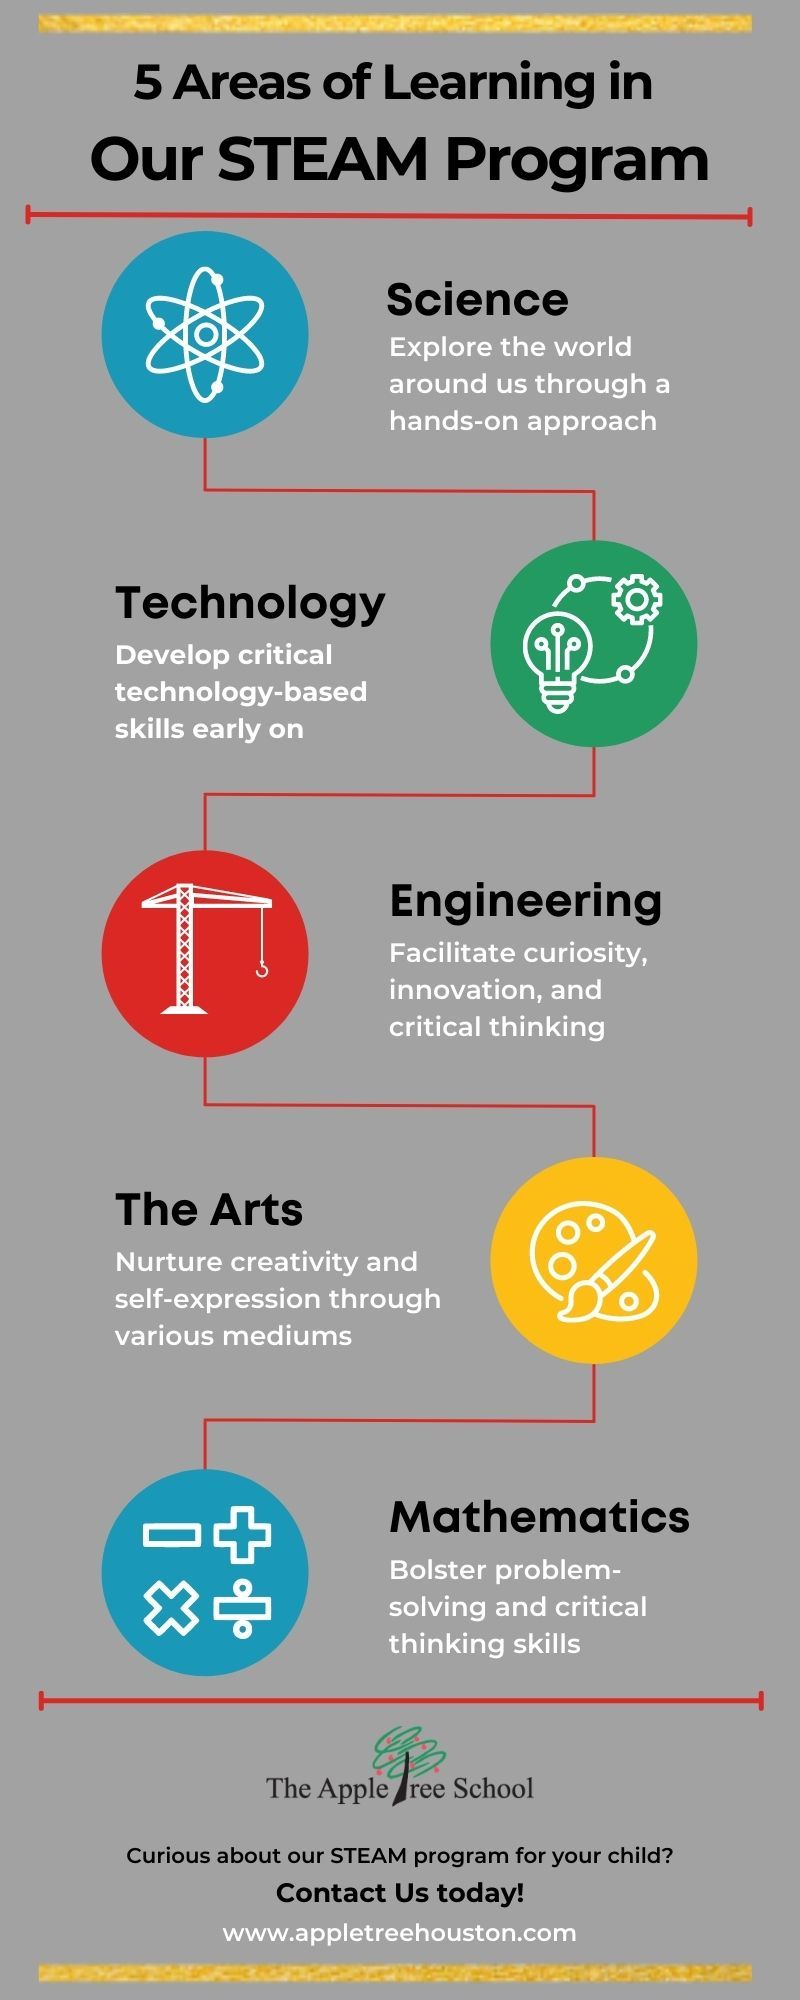 5 Areas of Learning in Our STEAM Program